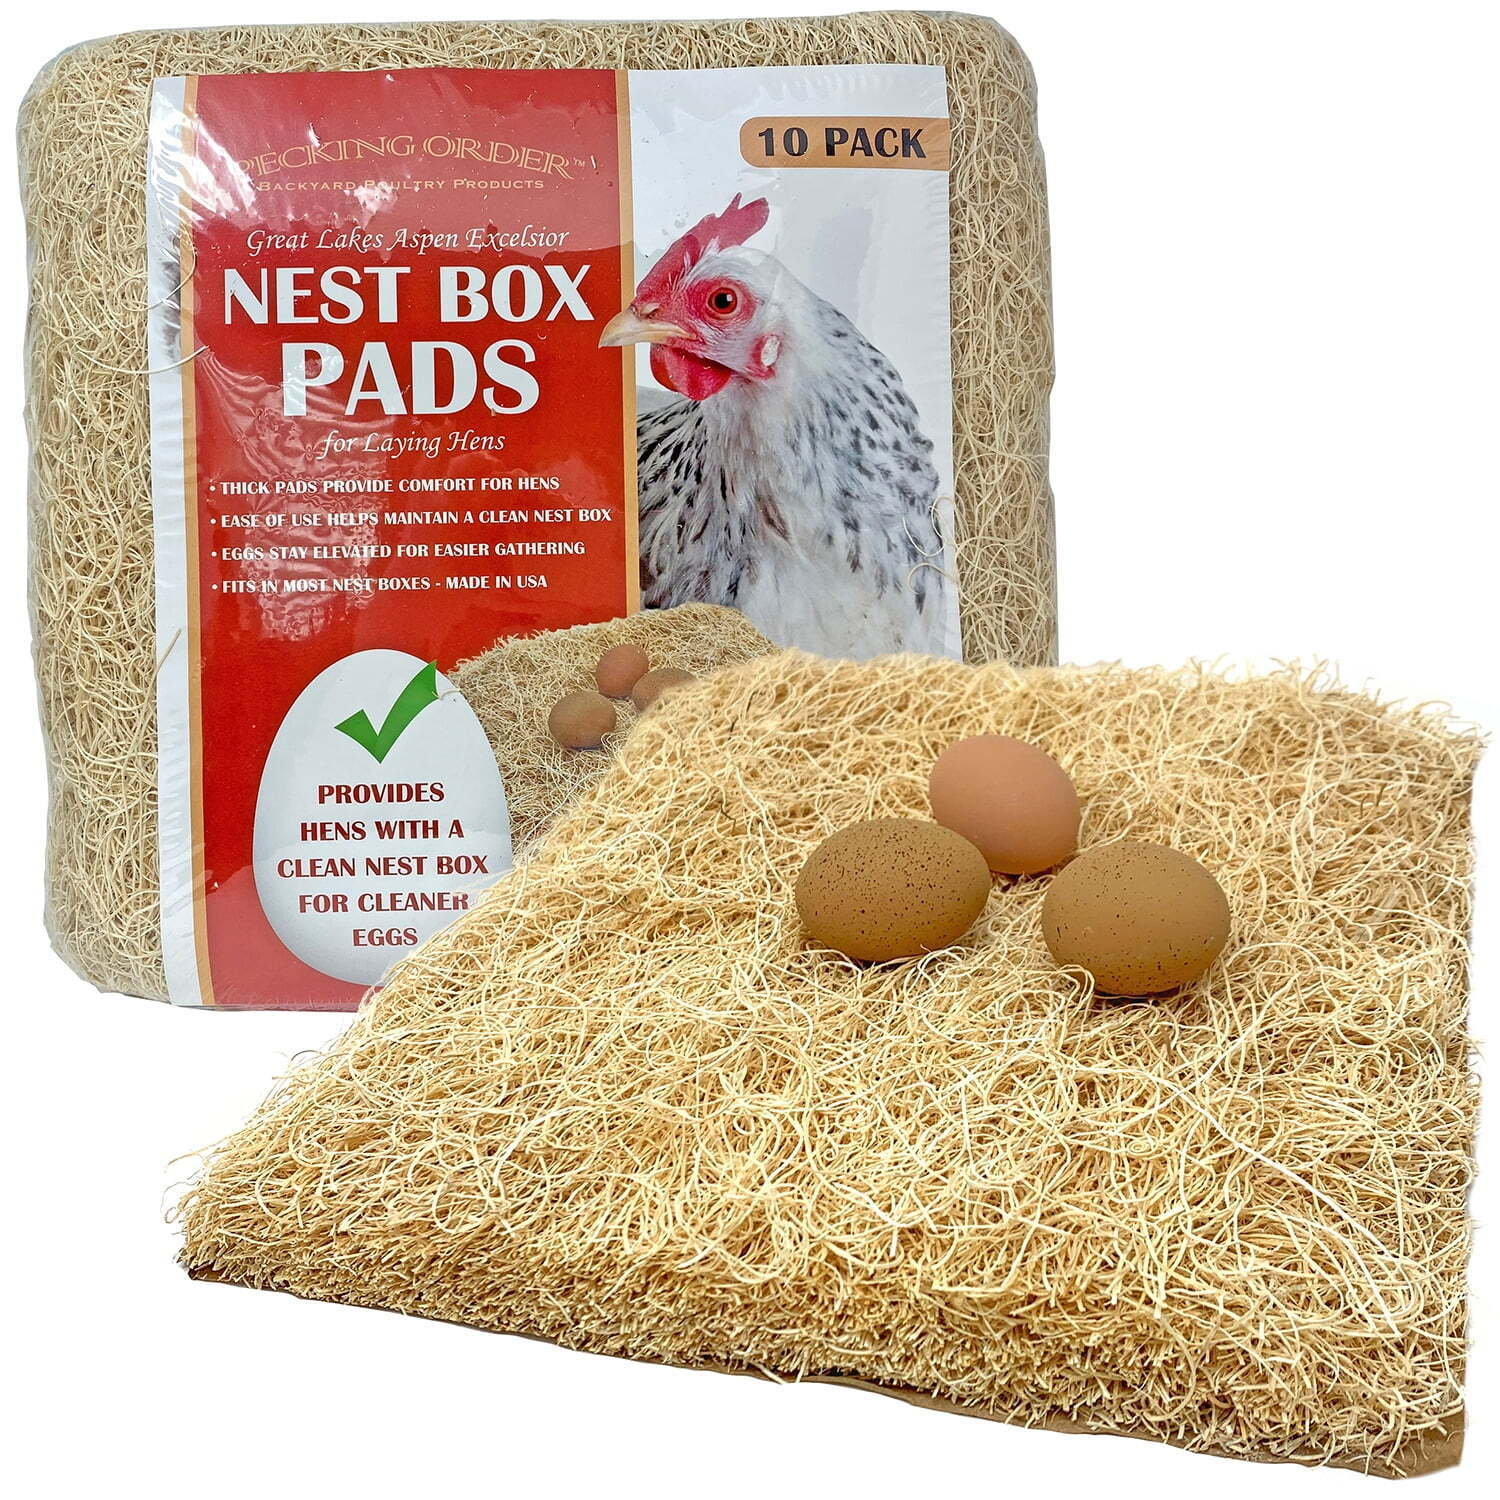 Chicken Nest Box Pads 10 Pack,Made with Great Lakes Aspen Excelsior Wood Fibers.